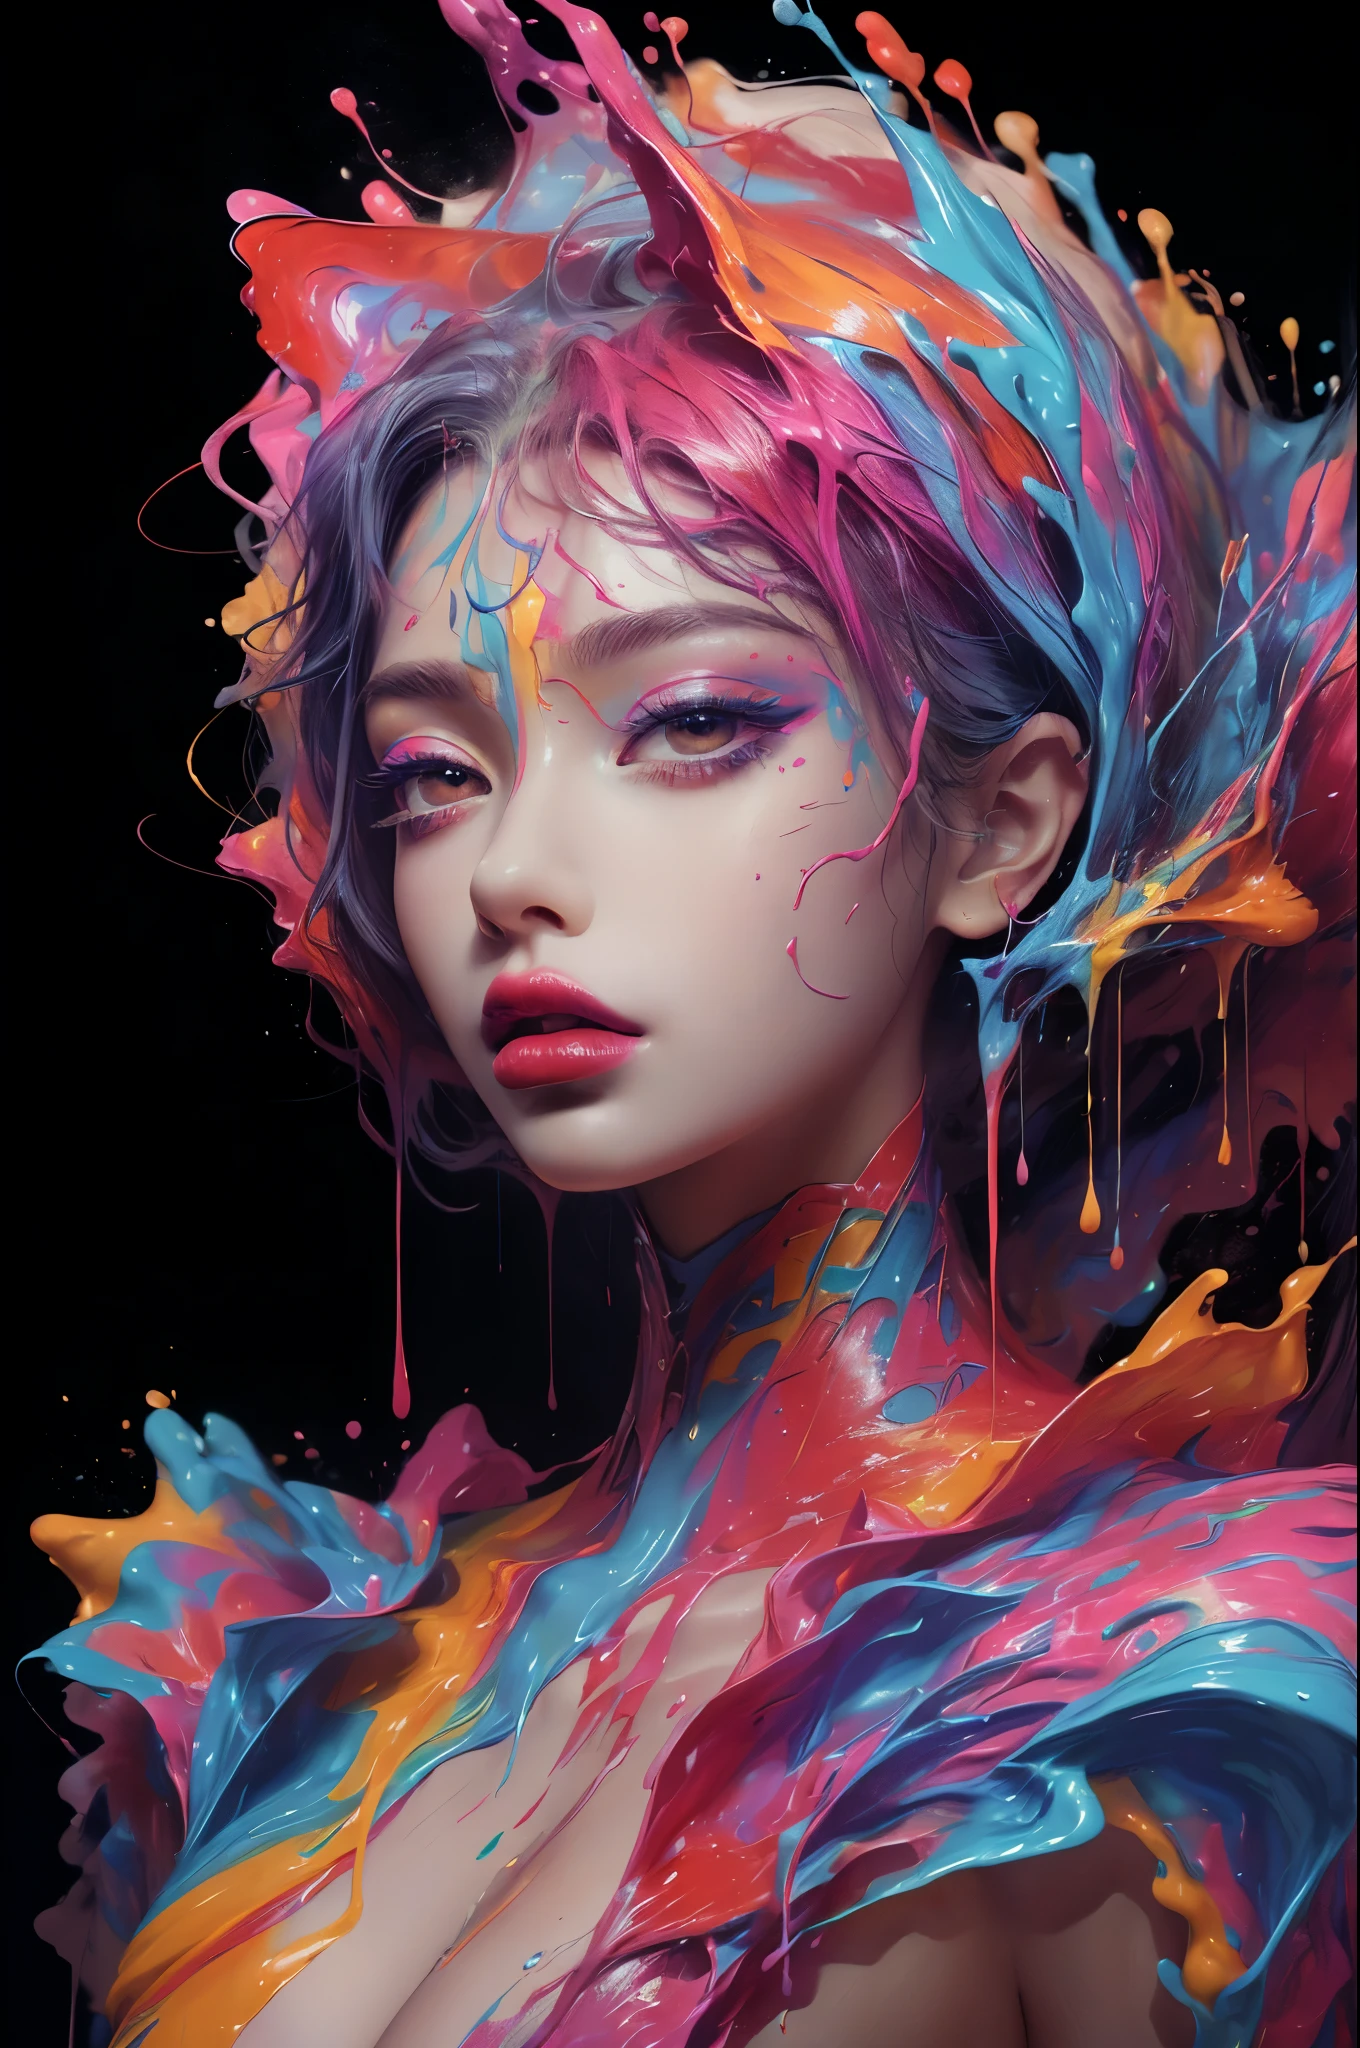 (masterpiece, top quality, best quality, official art, abstract aesthetic),solo,(1girl),(upper body|full body),a woman with colorful lipstick,psychedelic dripping colors,small breasts,best of behance,inspired by Alberto Seveso,smooth digital artwork,behance art,stunning digital art,beautiful acrylic fluid portrait,cgsociety saturated colors,photorealistic digital arts,trending digital art,surrealistic digital artwork,glossy digital painting,exquisite digital fashion photography,uhd,